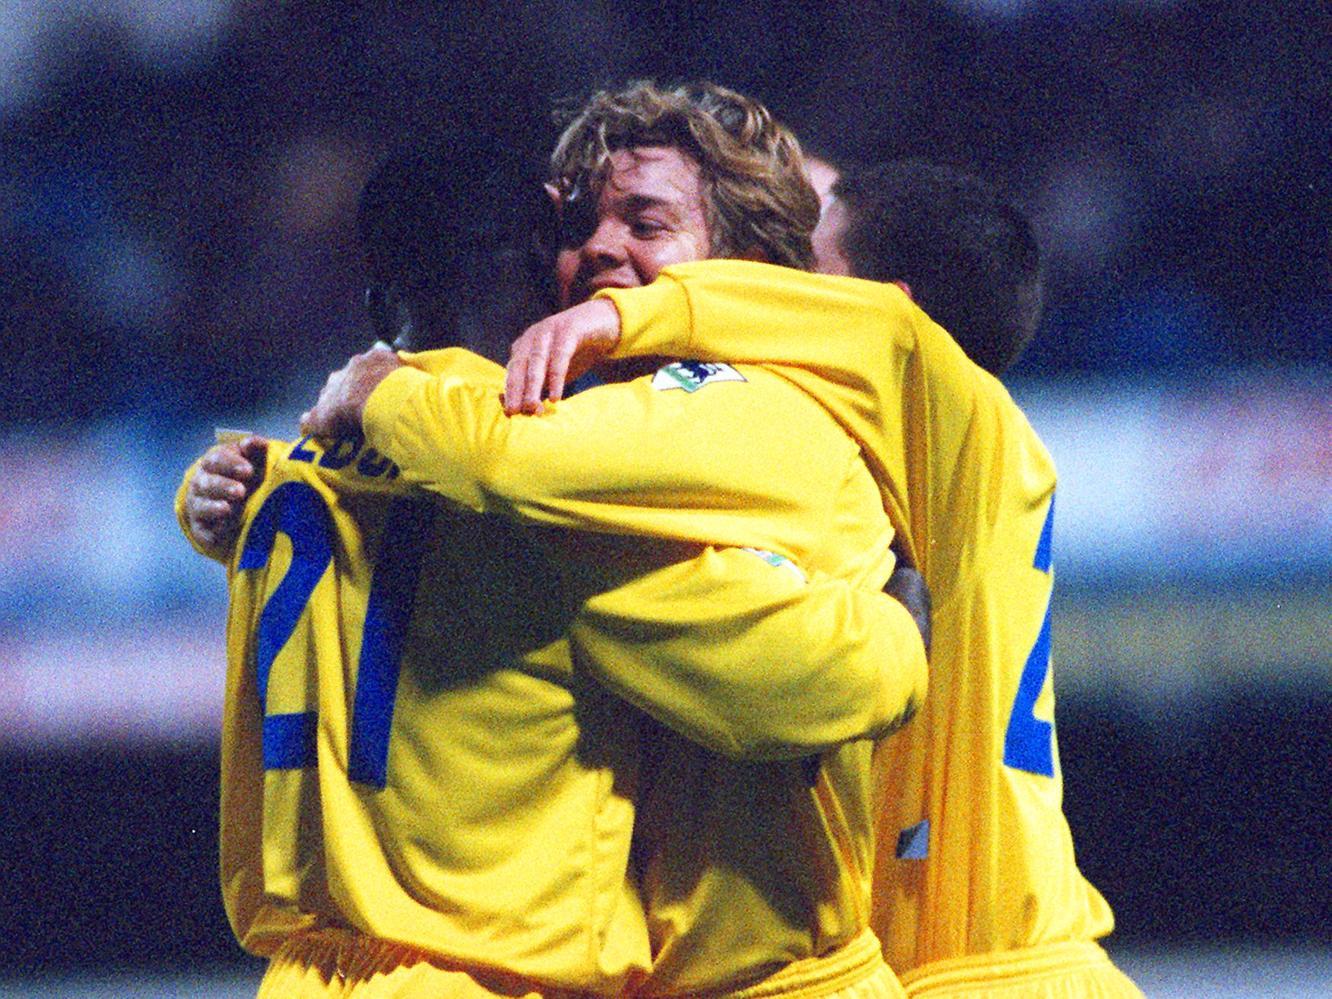 Cuddles all round as Tony Yeboah puts Leeds 2-0 up against QPR at Loftus Road in March 1996.